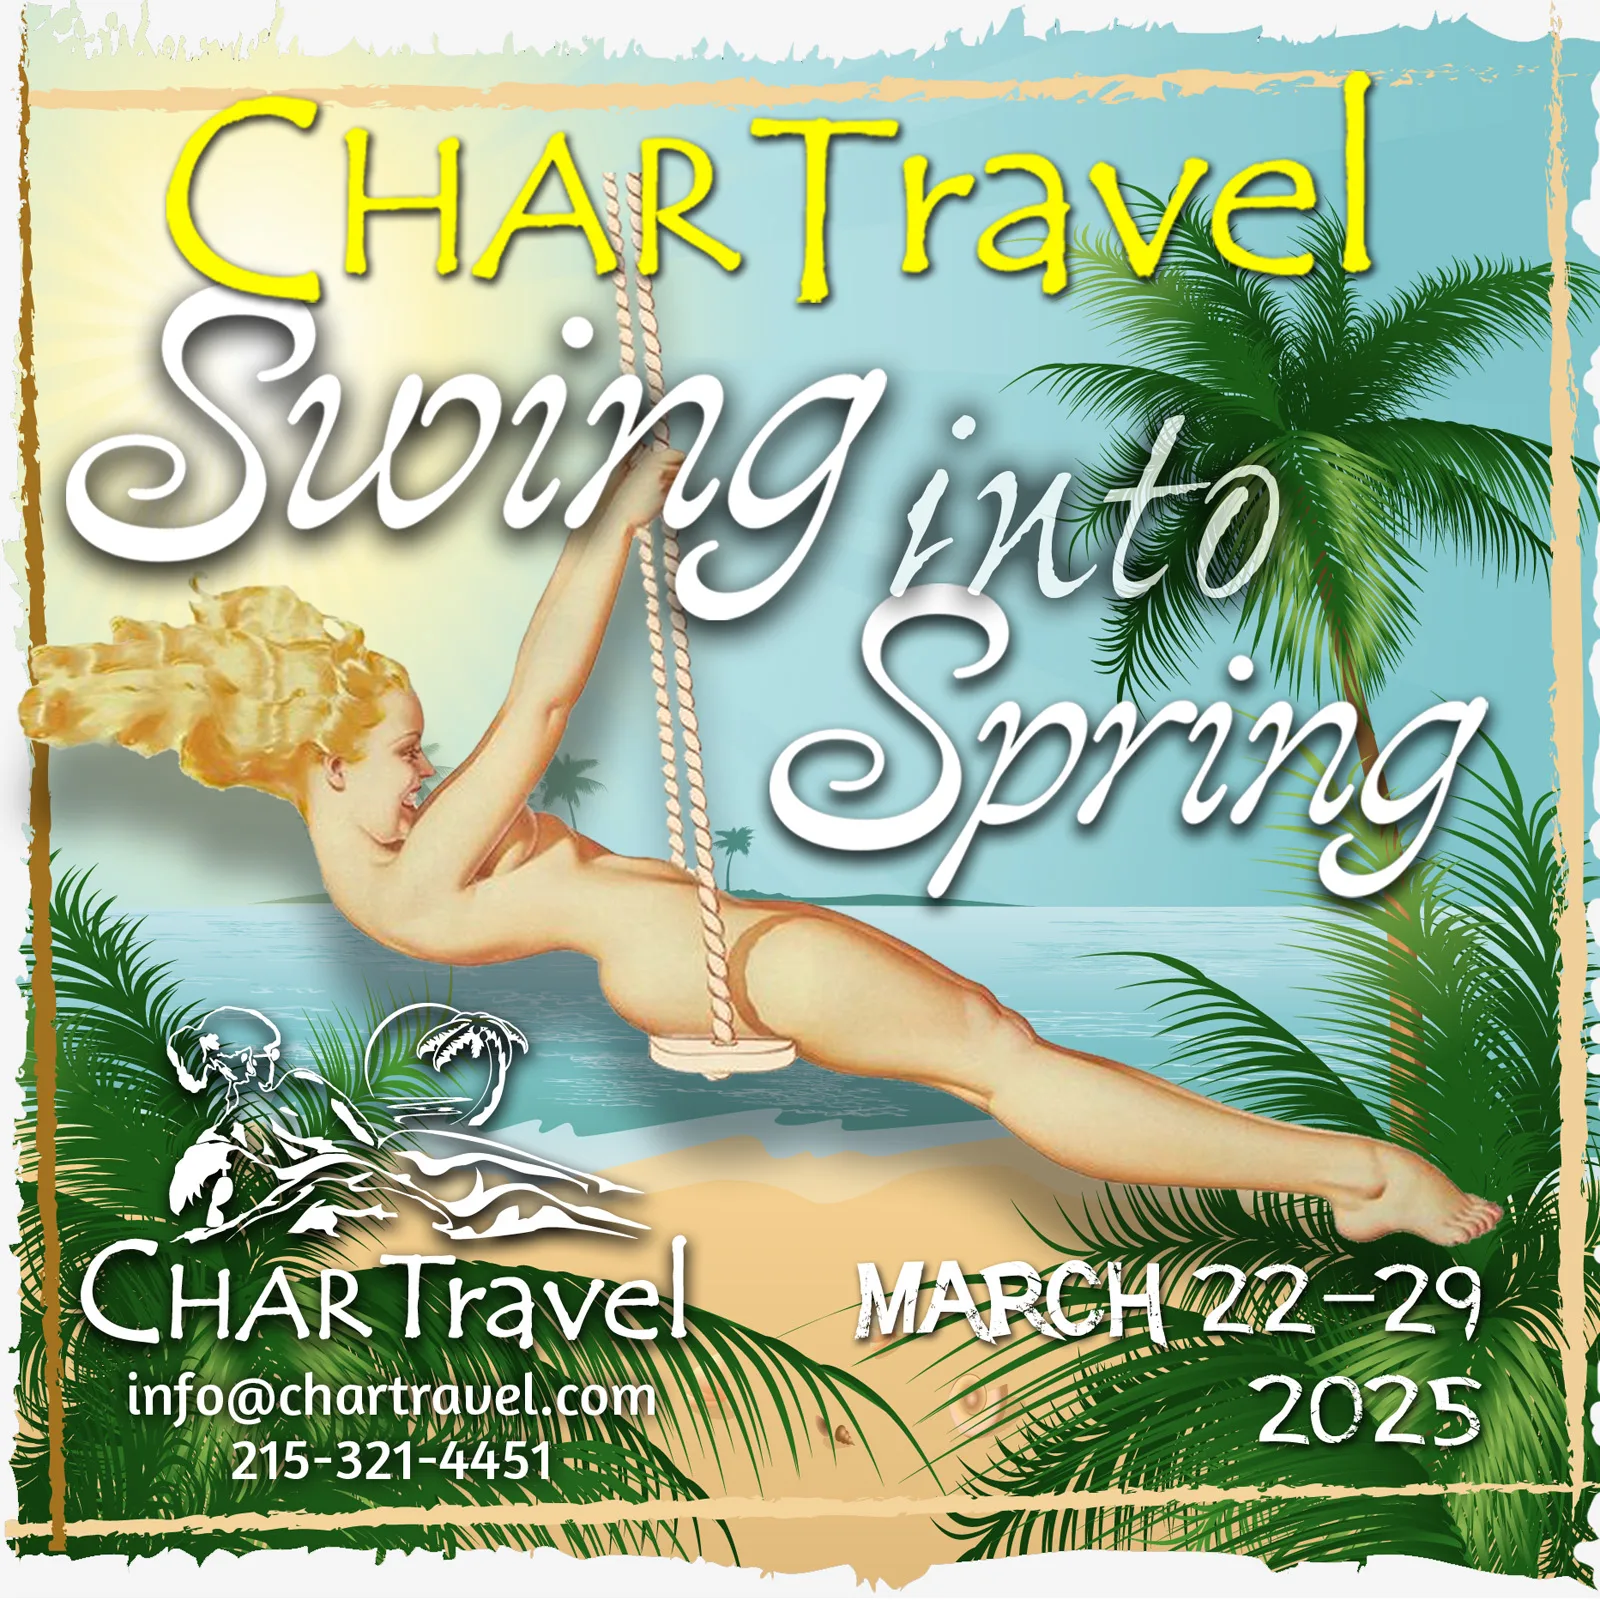 Group Event - Swing into Spring - March 22 - 29, 2025 - Hedonism II Resort, Negril Jamaica